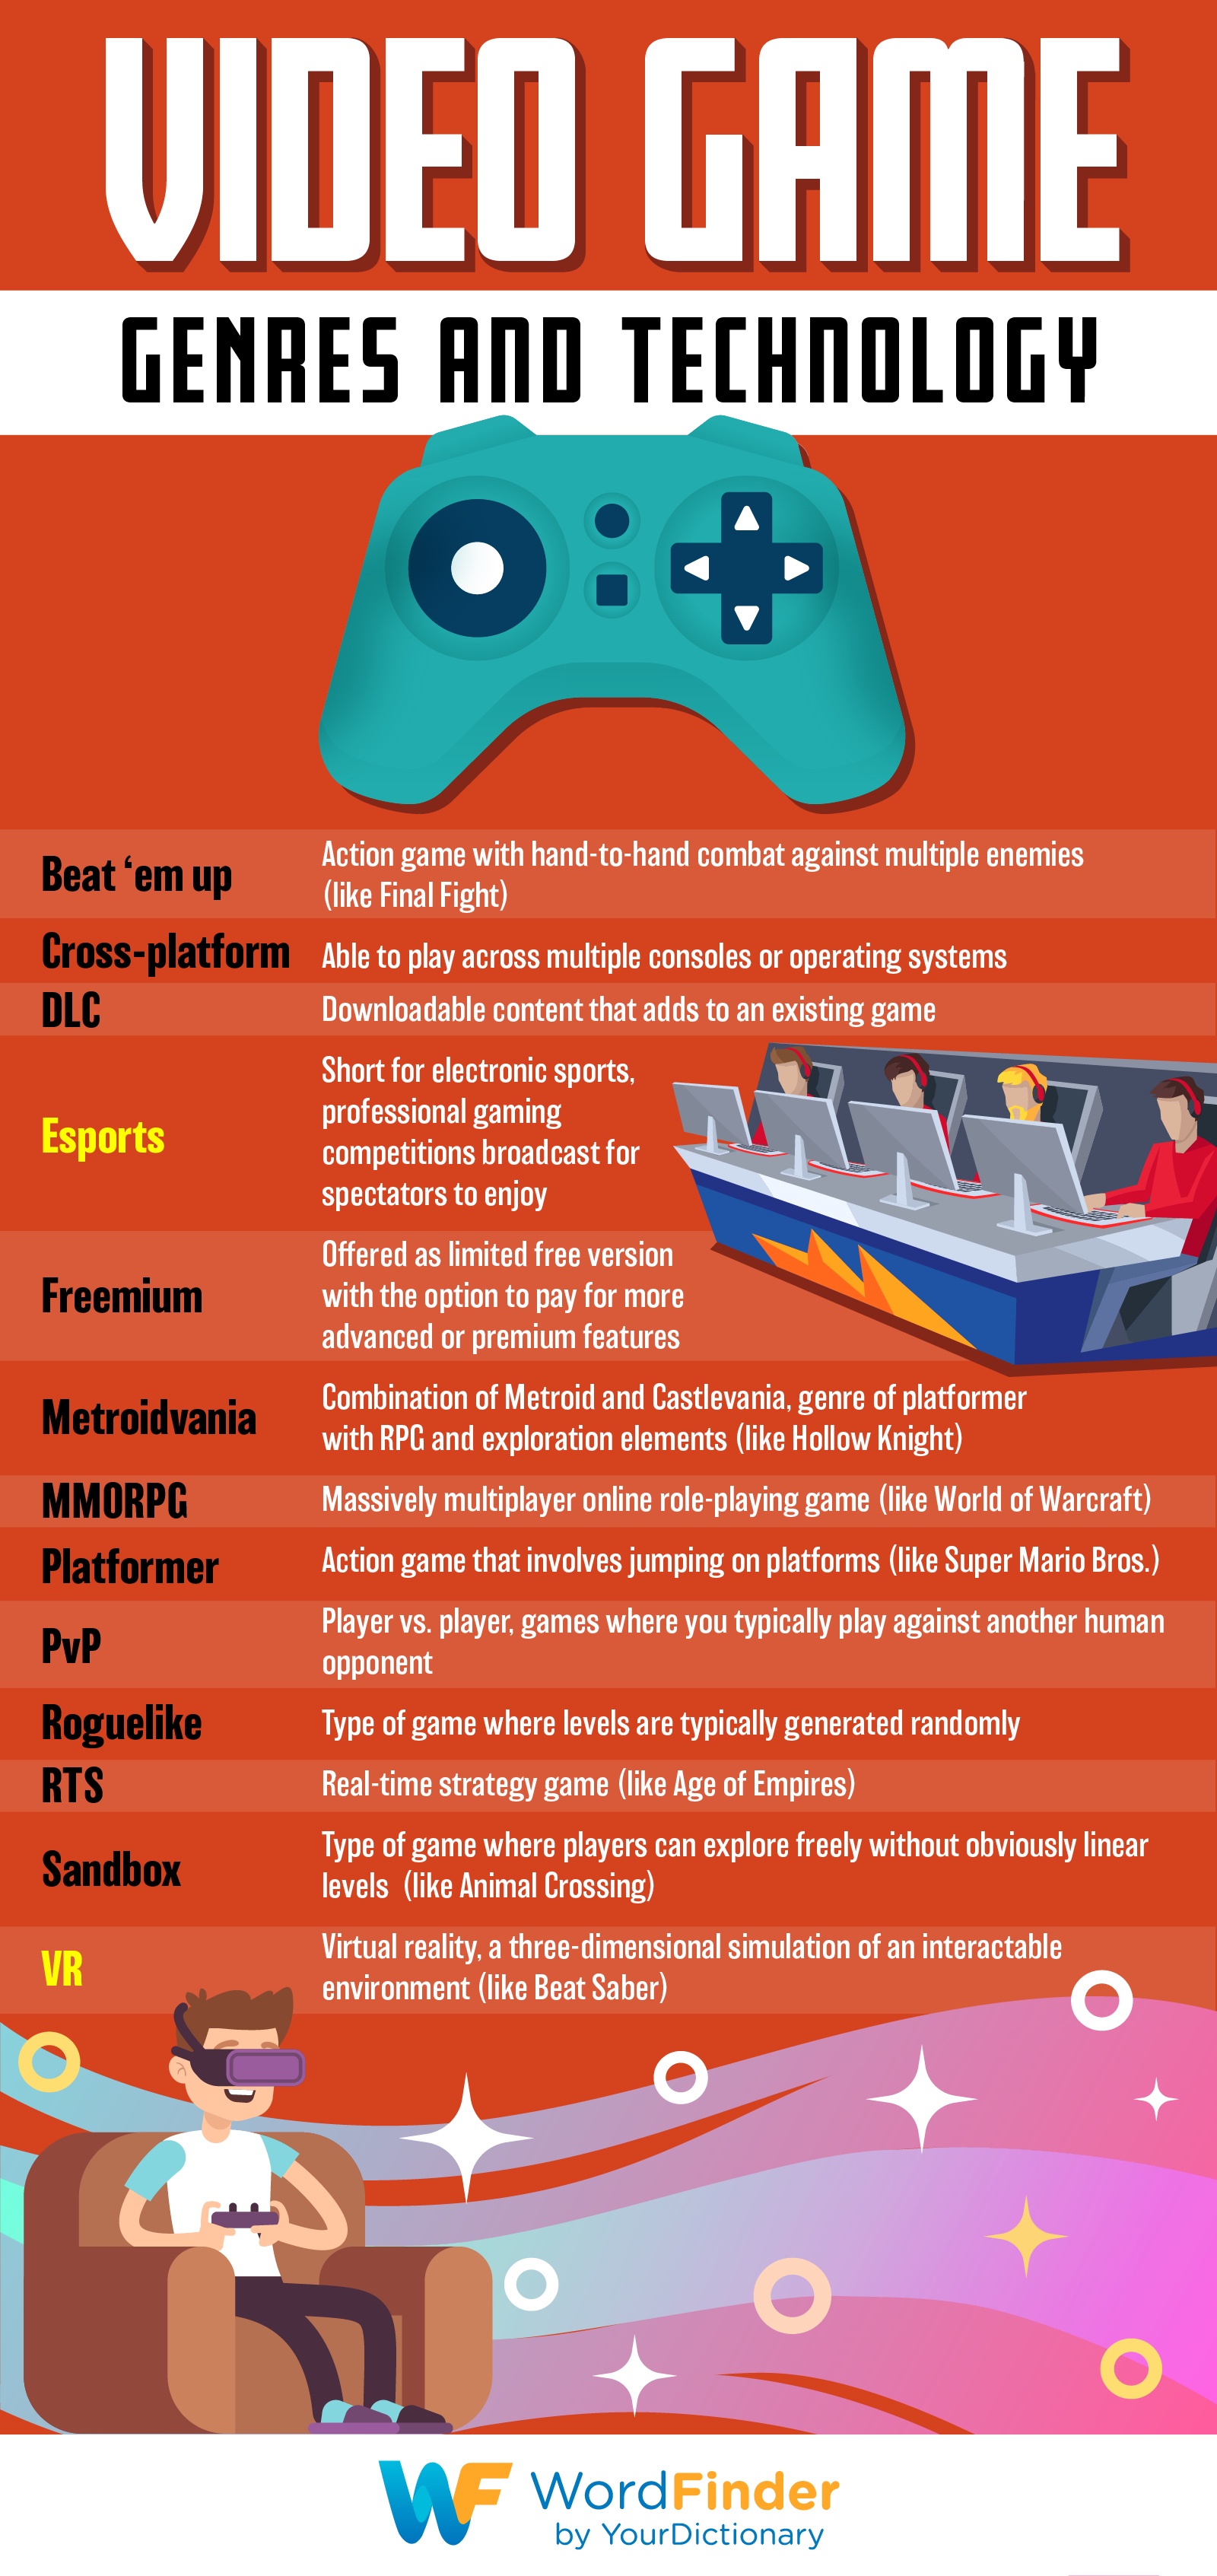 video game genres and technology infographic